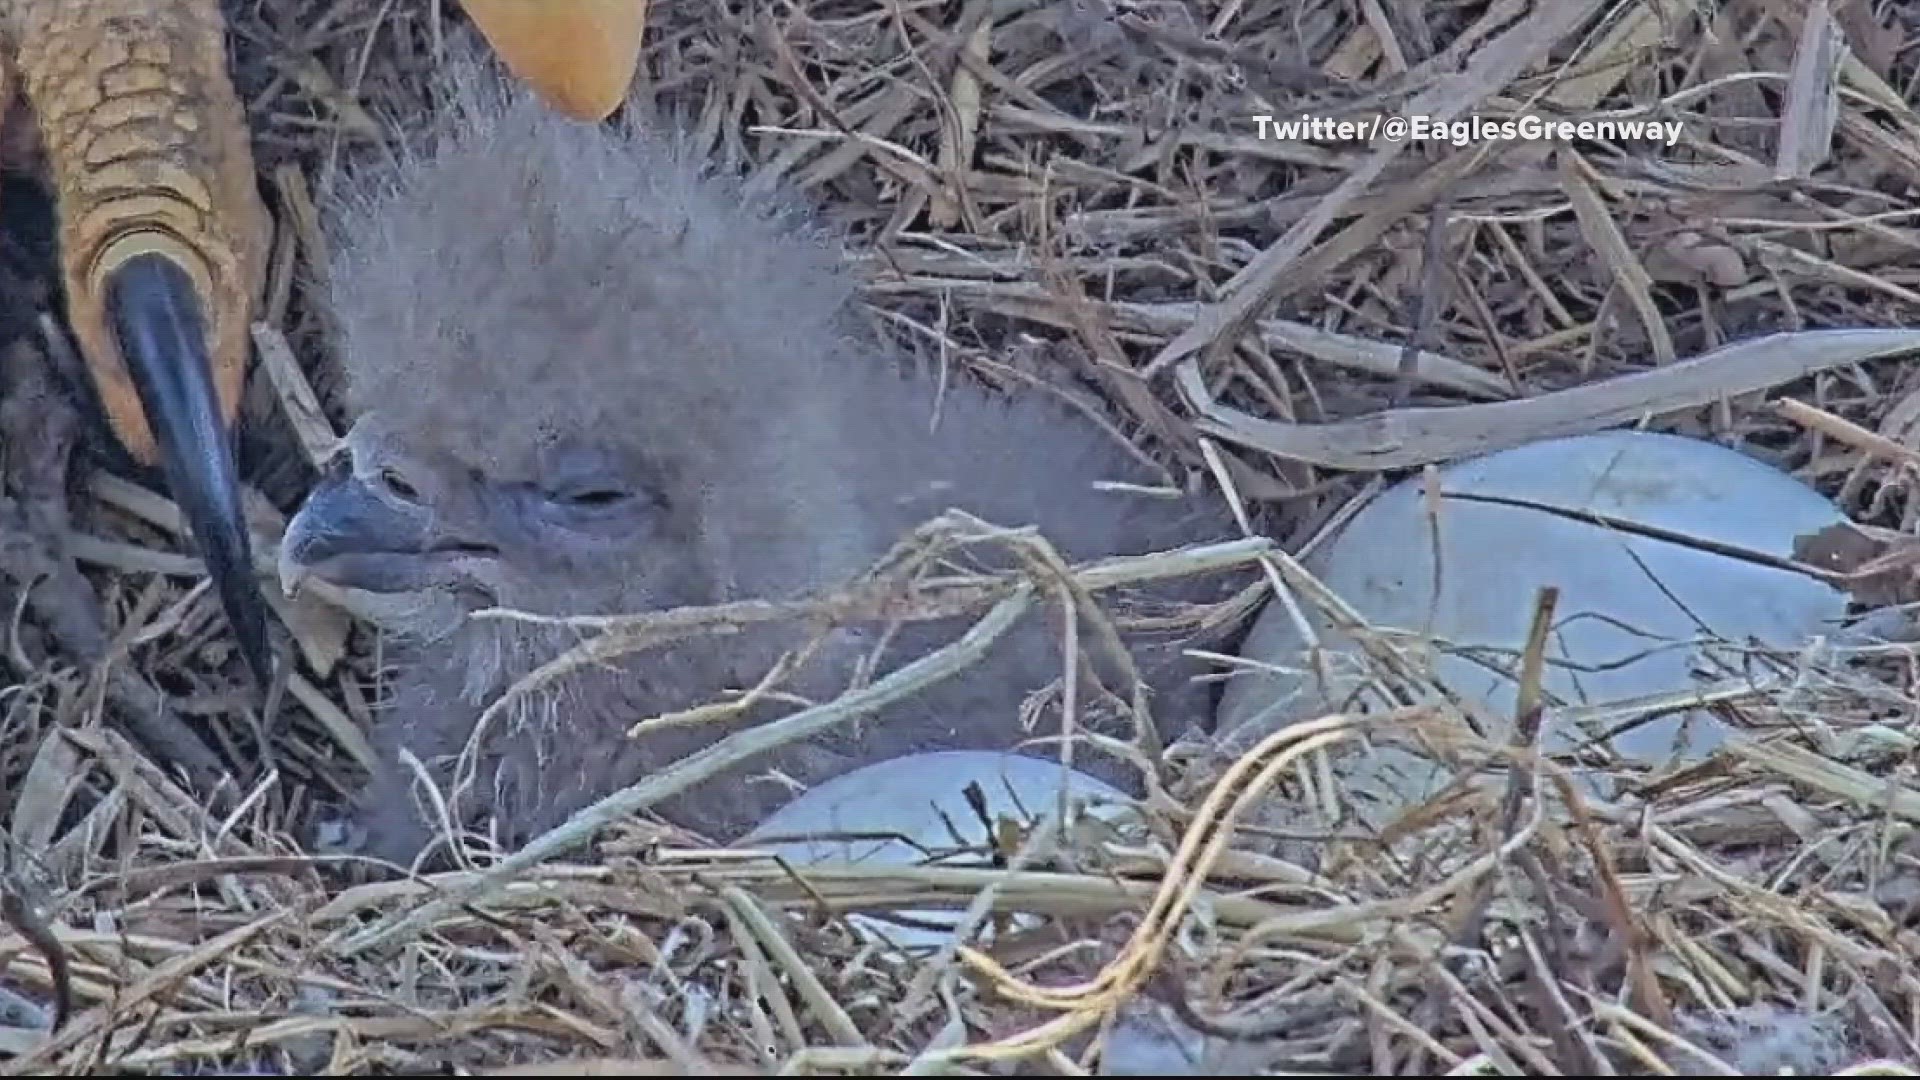 The eagle population in Loudoun County is about to grow a little bit bigger after the birth of an eaglet this week.